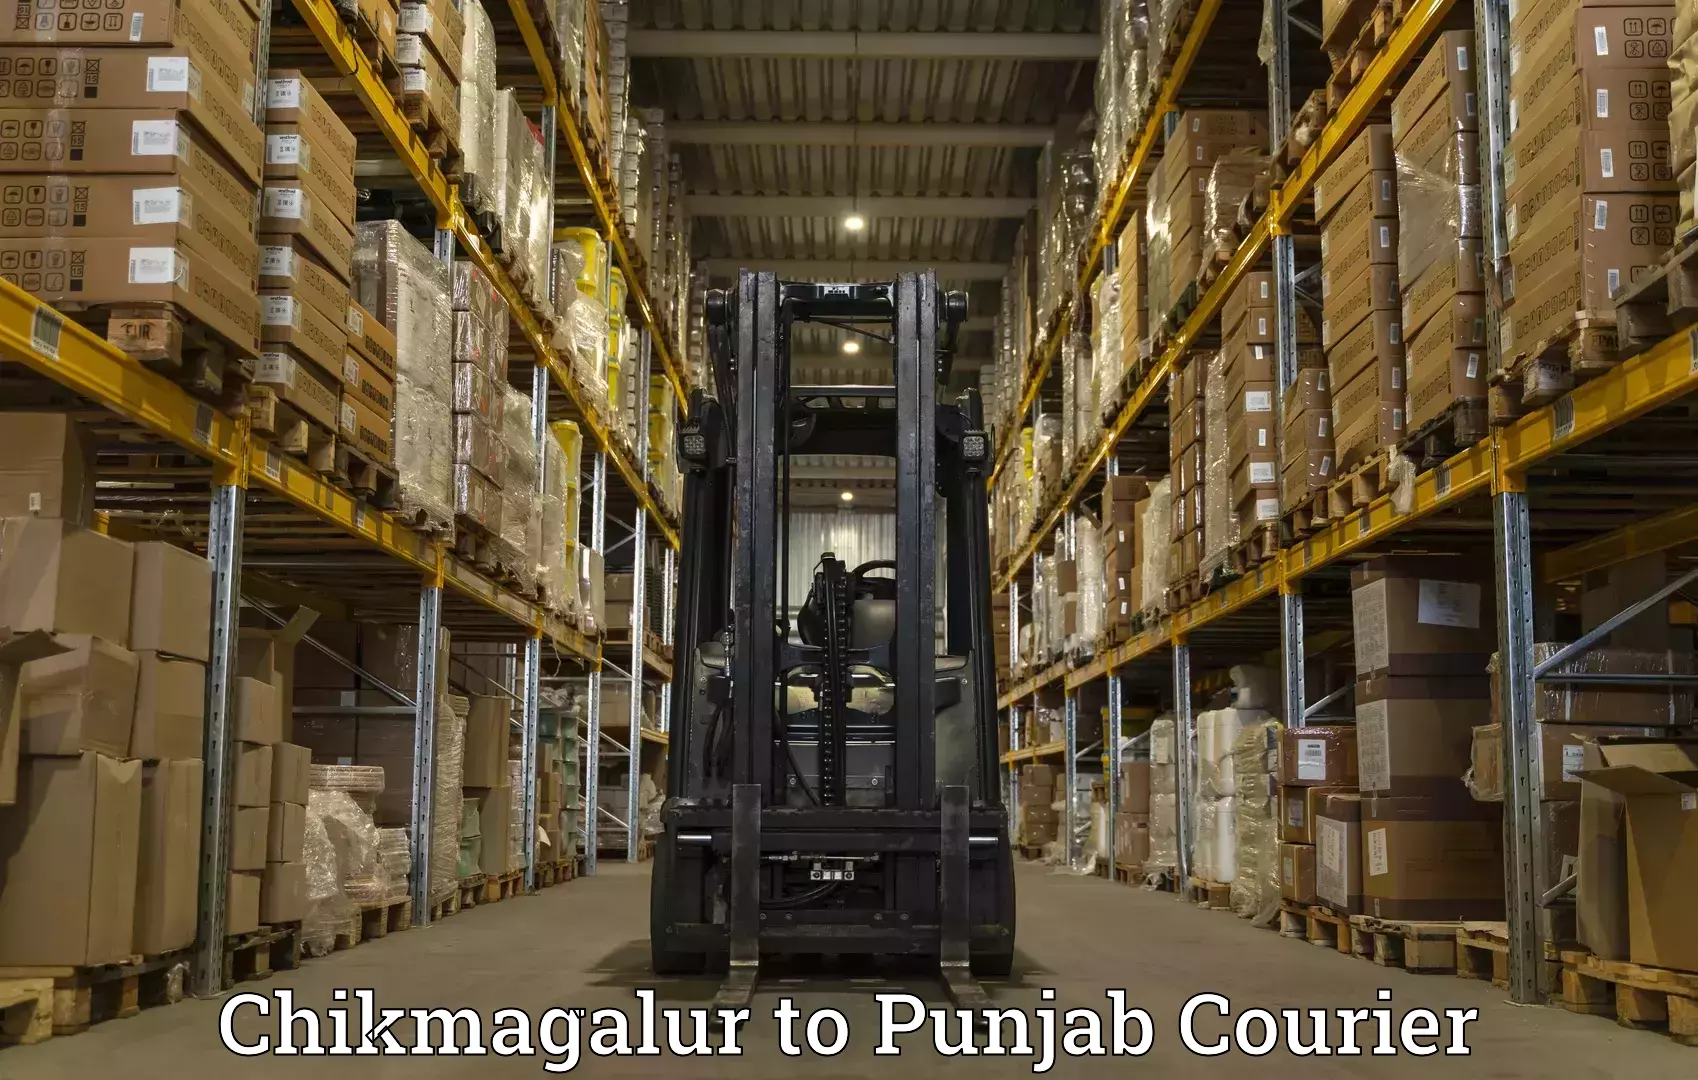 Subscription-based courier Chikmagalur to Bathinda